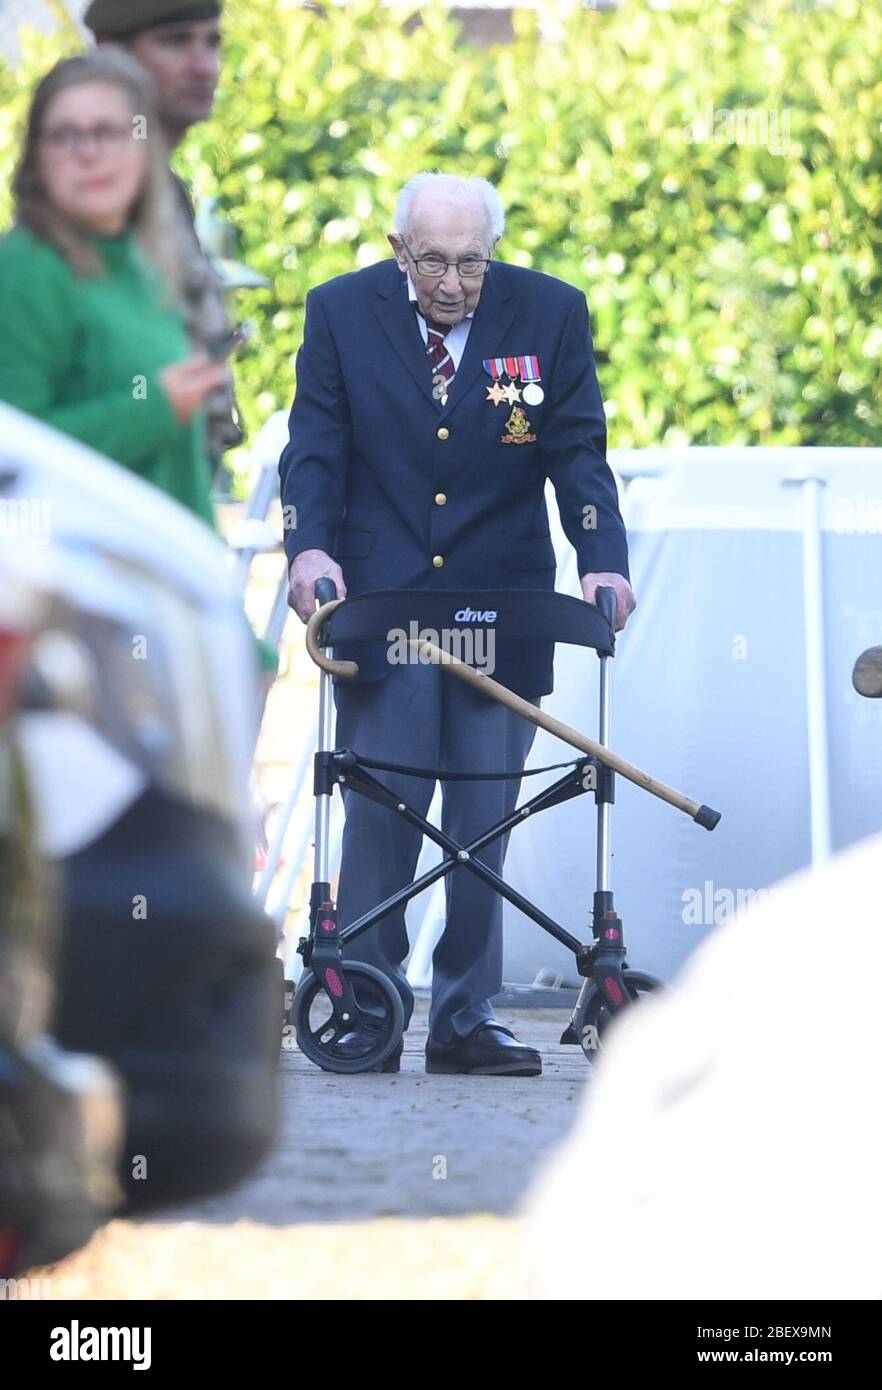 Captain Tom Moore, a 99-year-old veteran, completing the 100th length of his garden. Captain Moore has raised over 12 million pounds for the NHS after receiving donations to his fundraising challenge from around the world. Stock Photo